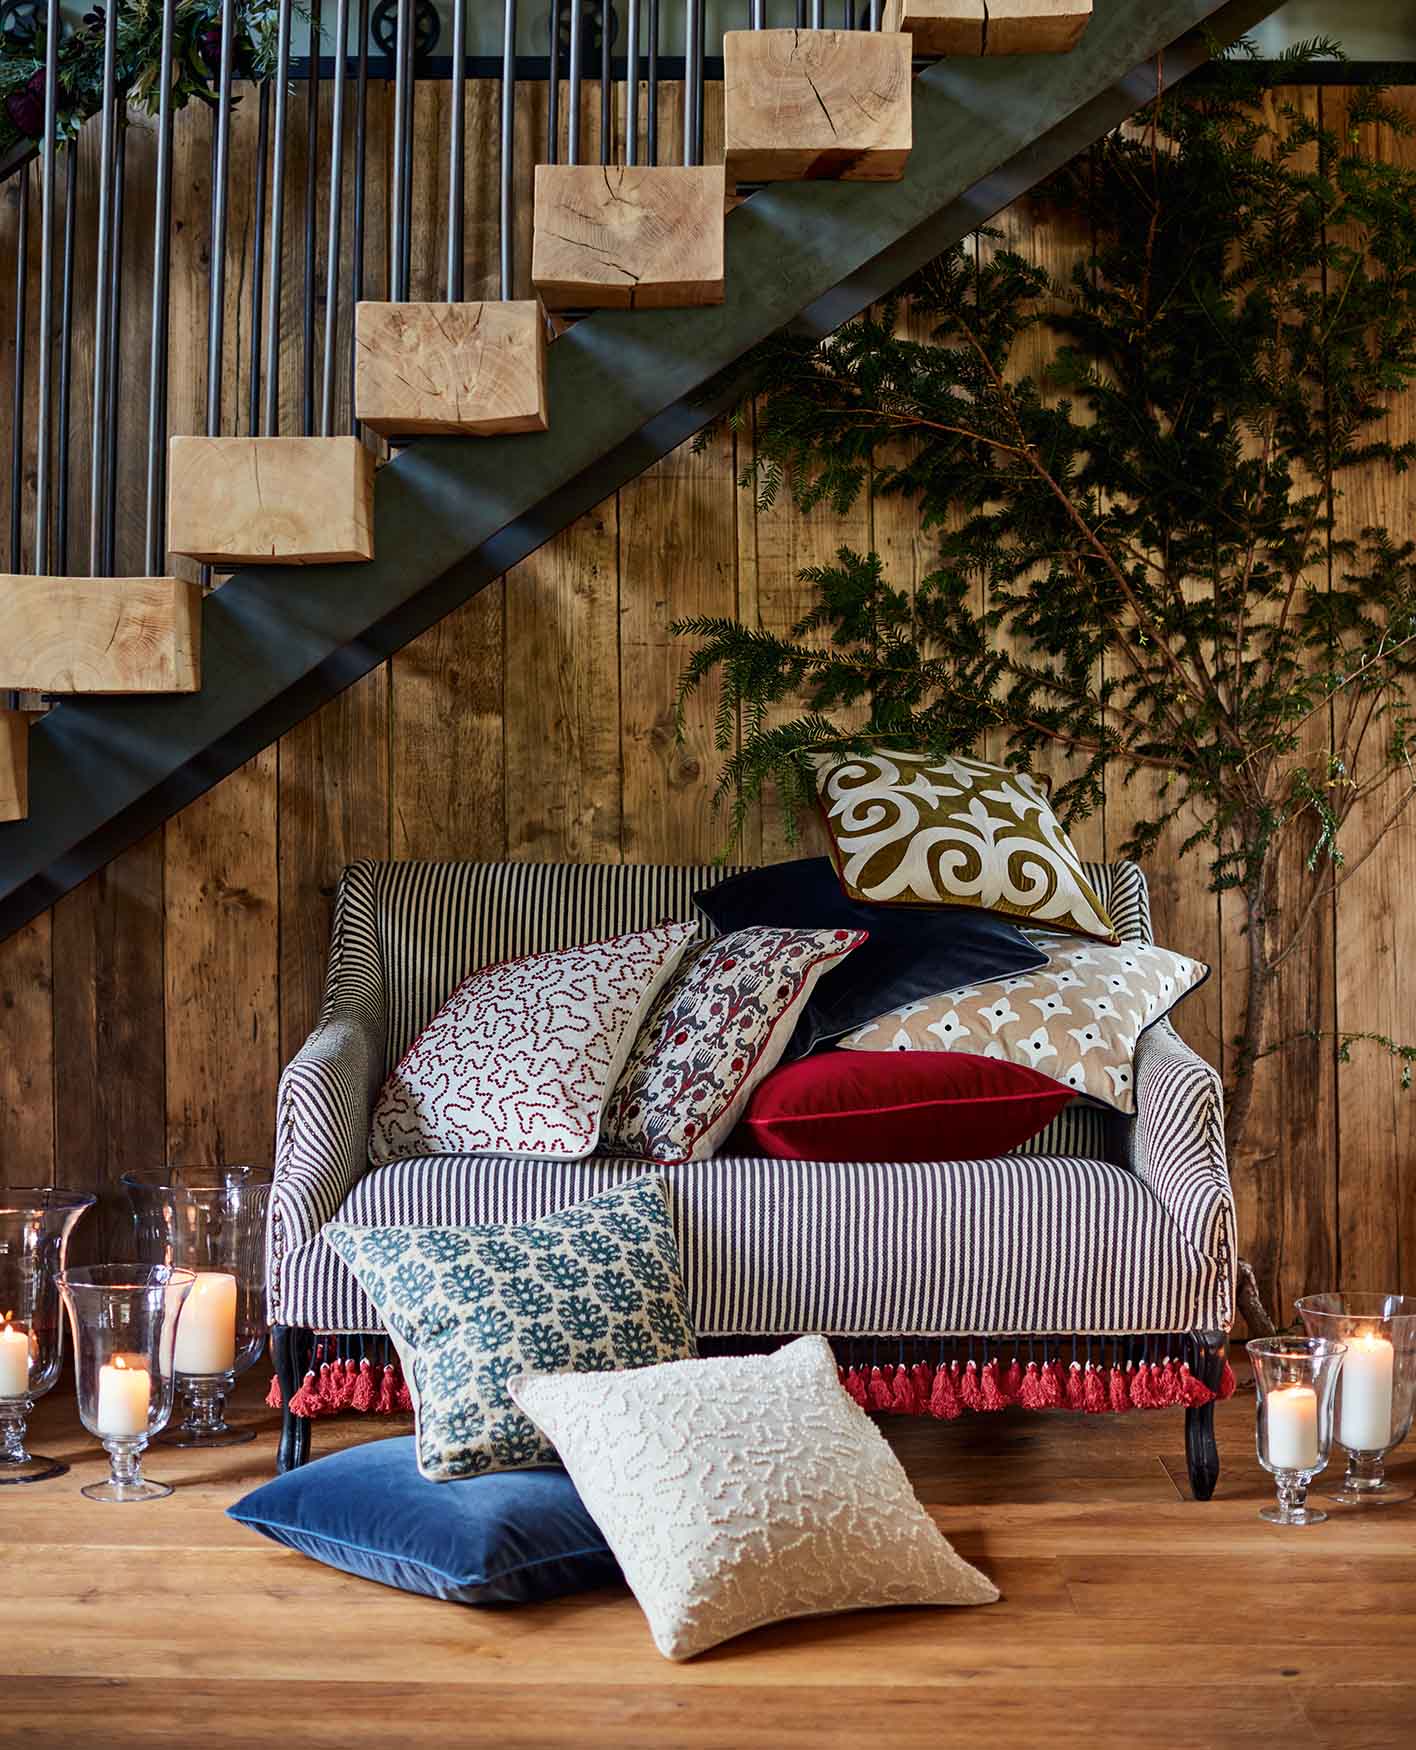 A wooden staircase above a sofa surrounded by cushions and candles.